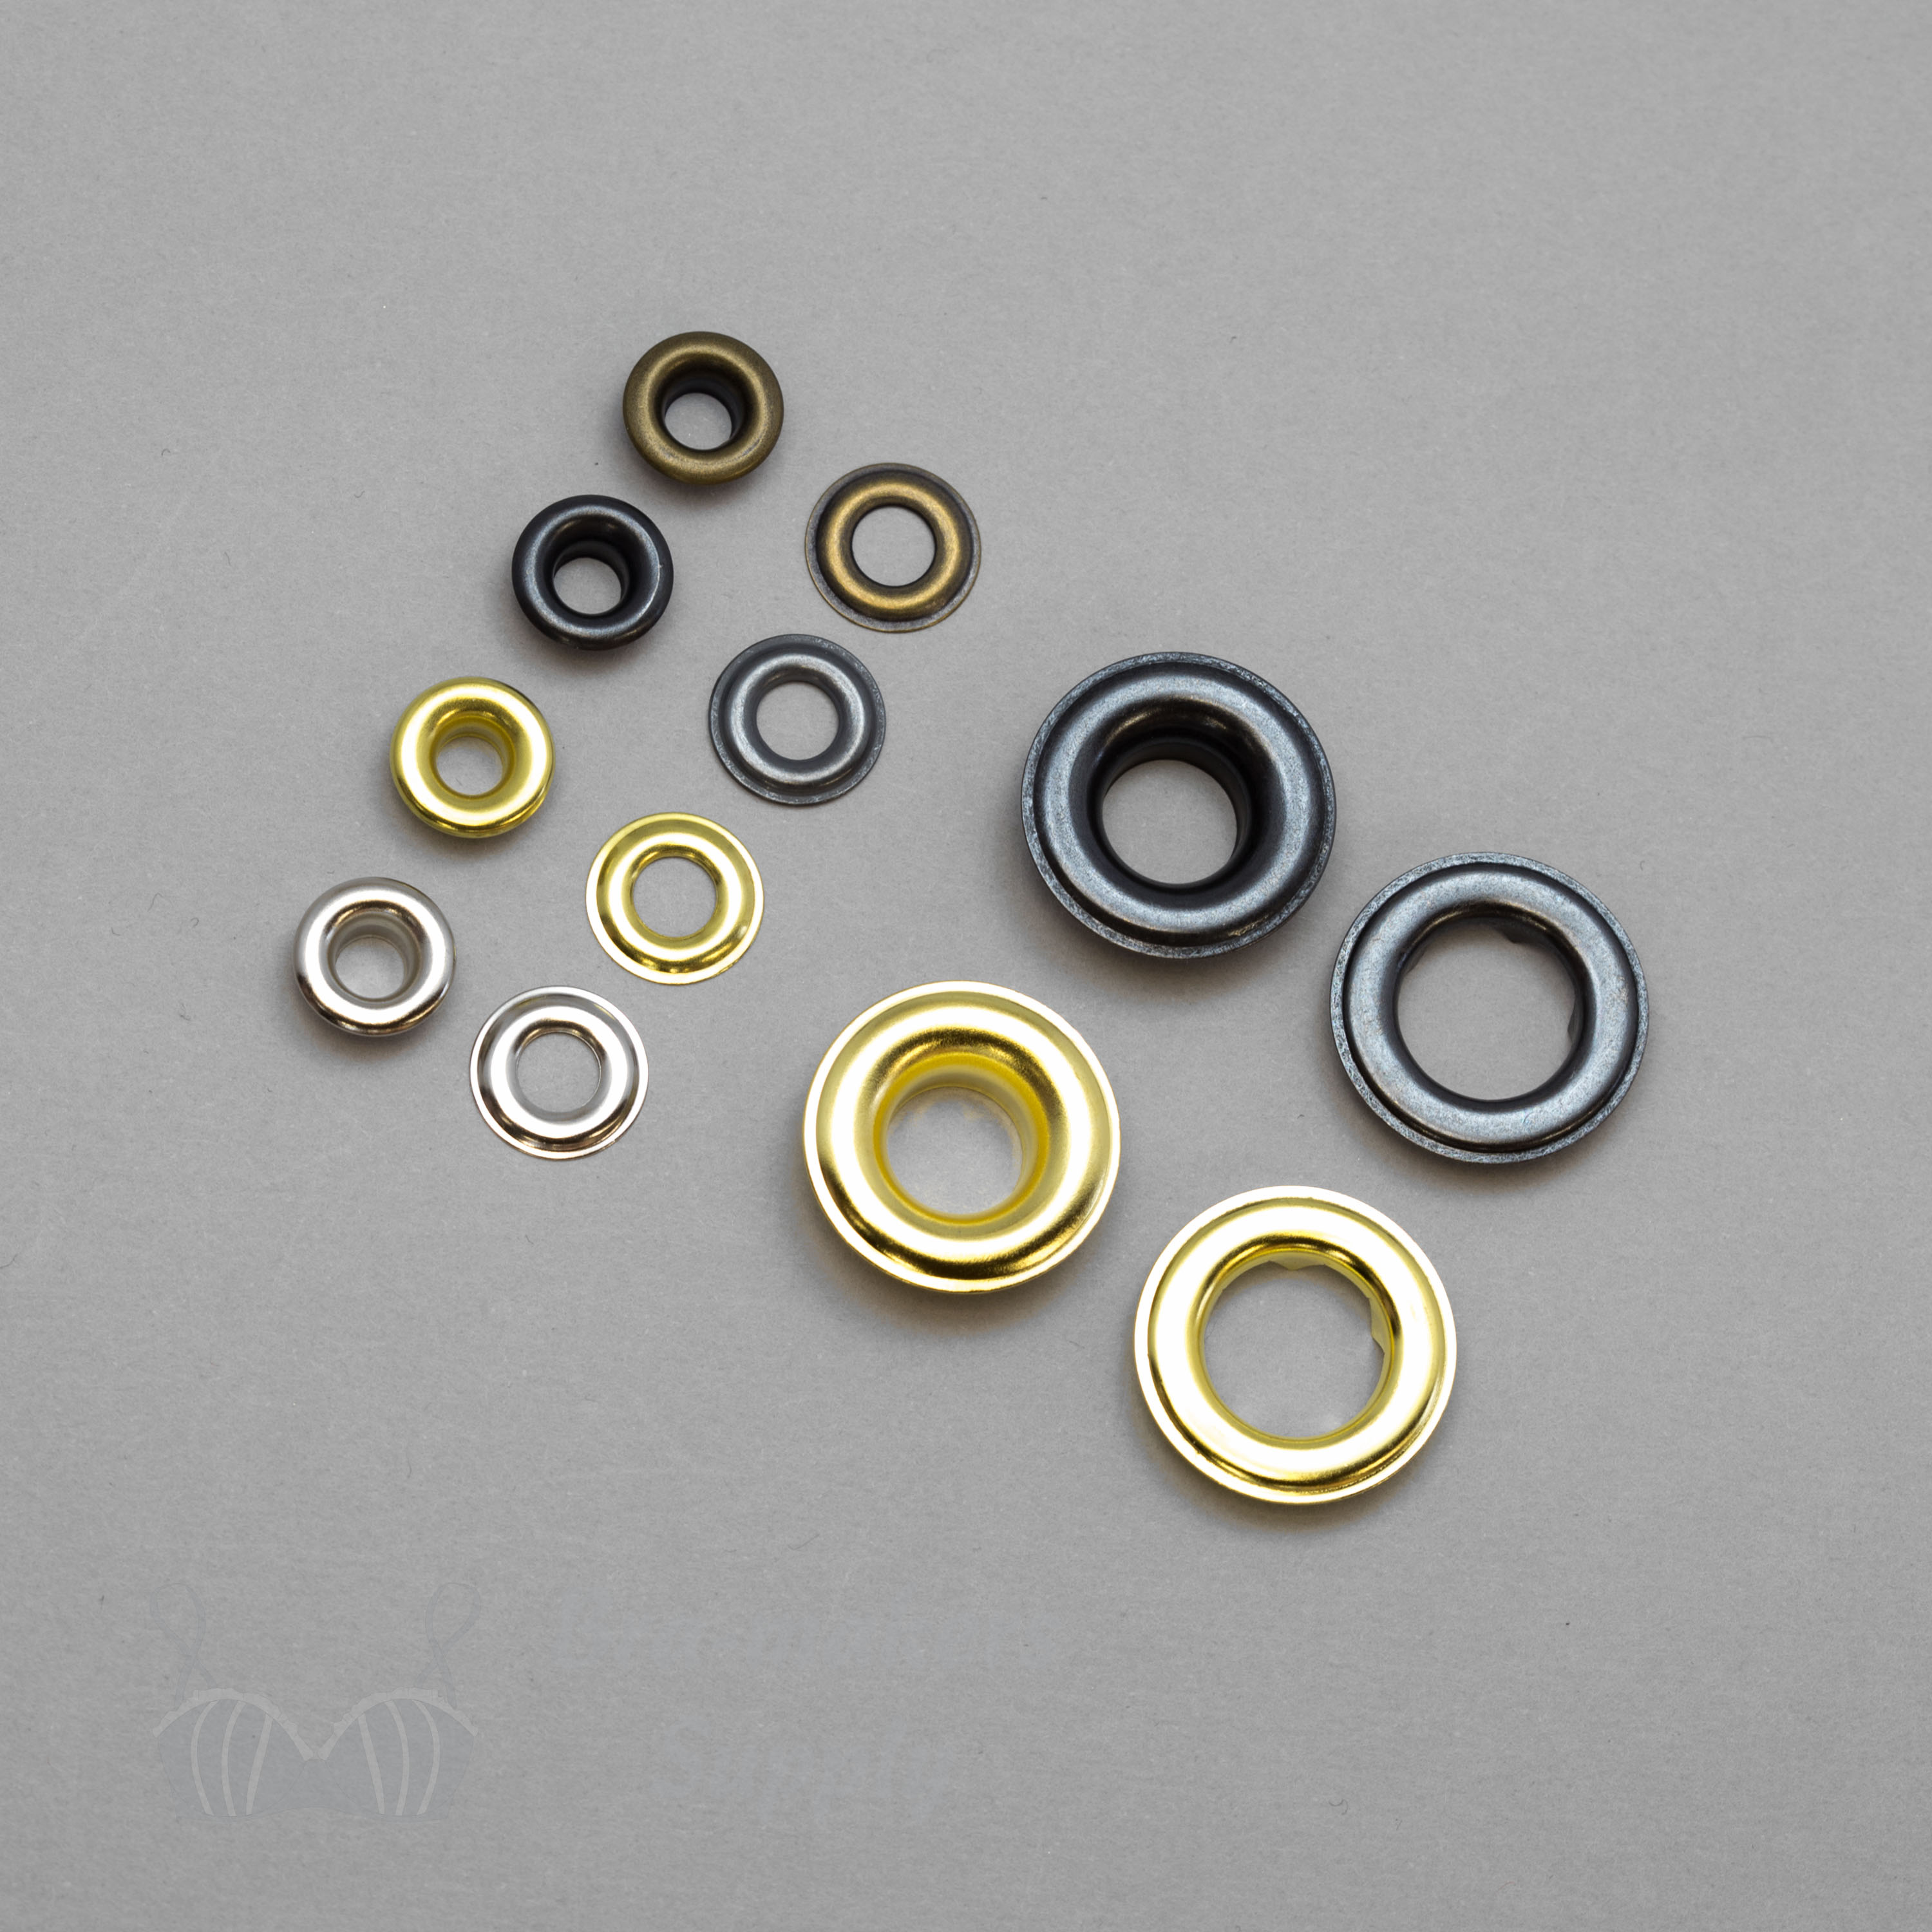 Metal Corset Grommets Two-Part Eyelets - Bra-Makers Supply